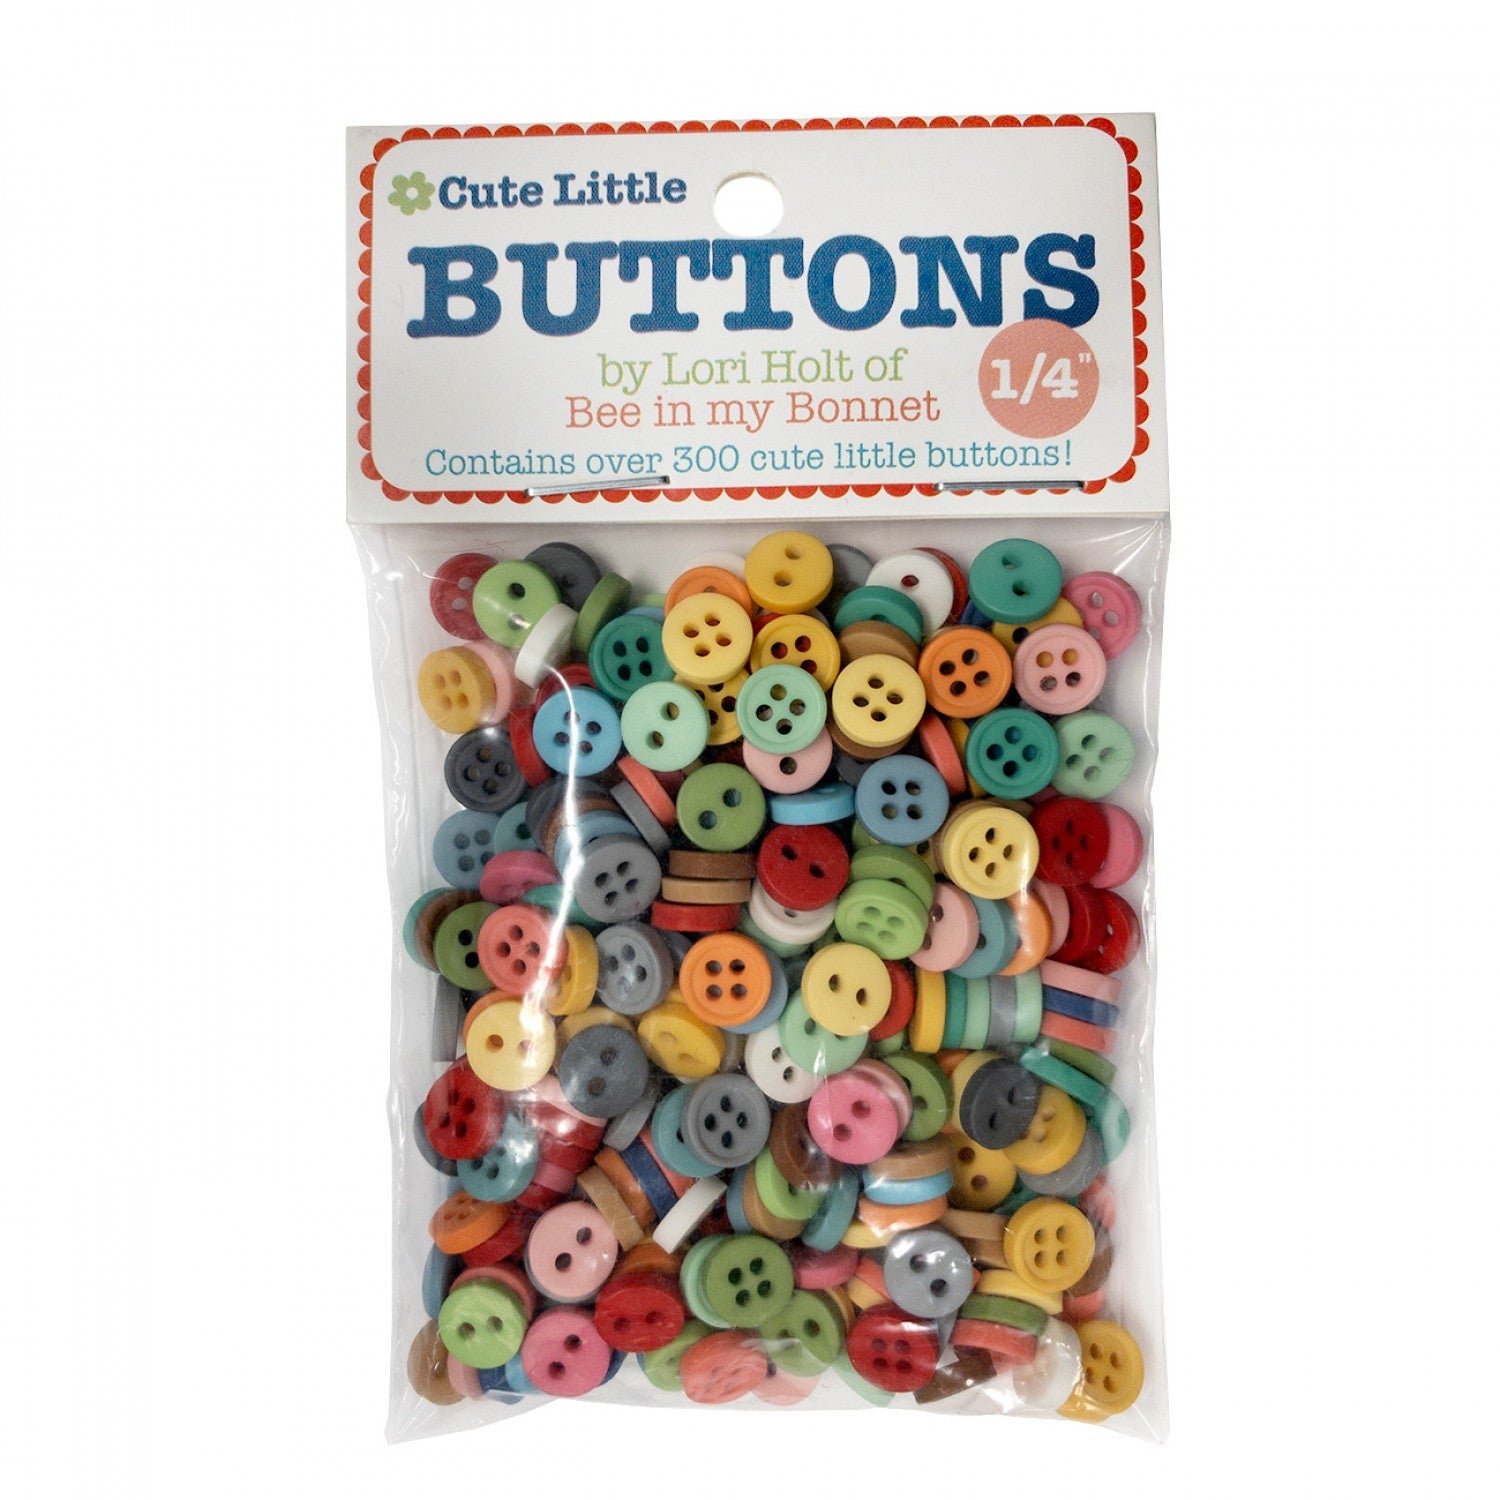 Cute Little Buttons - 1/4" by Lori Holt